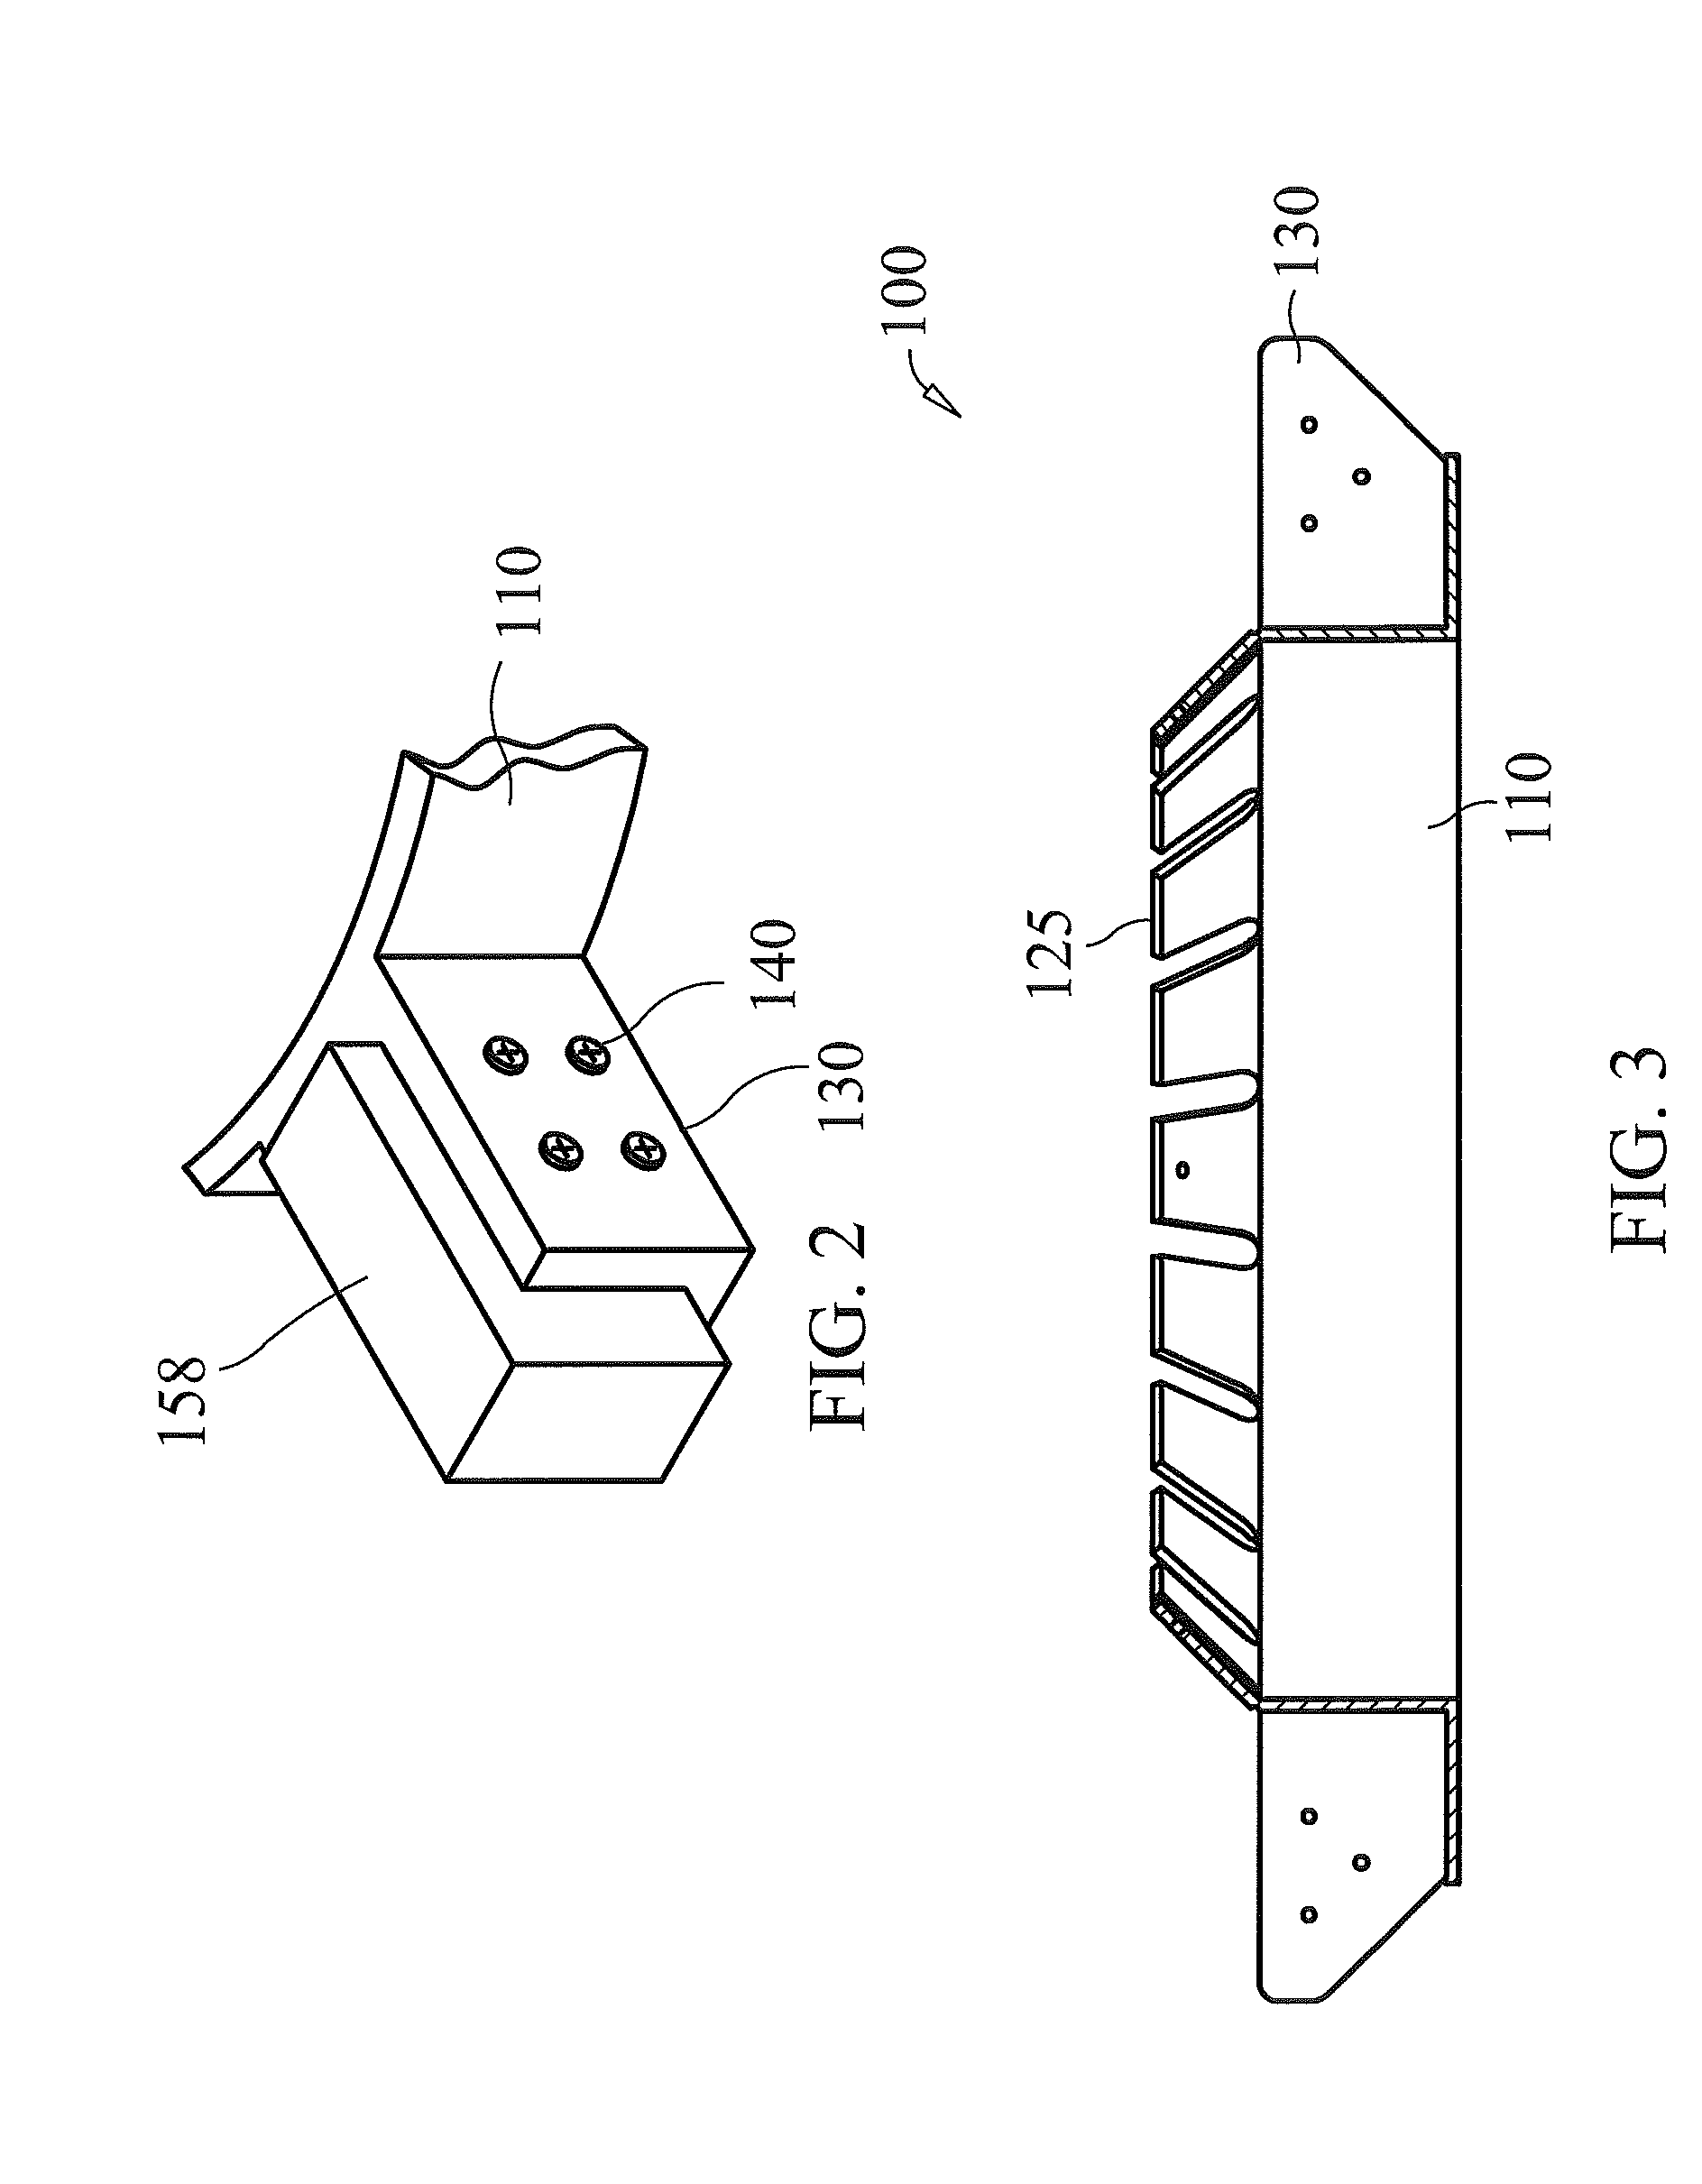 Concrete form alignment tool and method of use